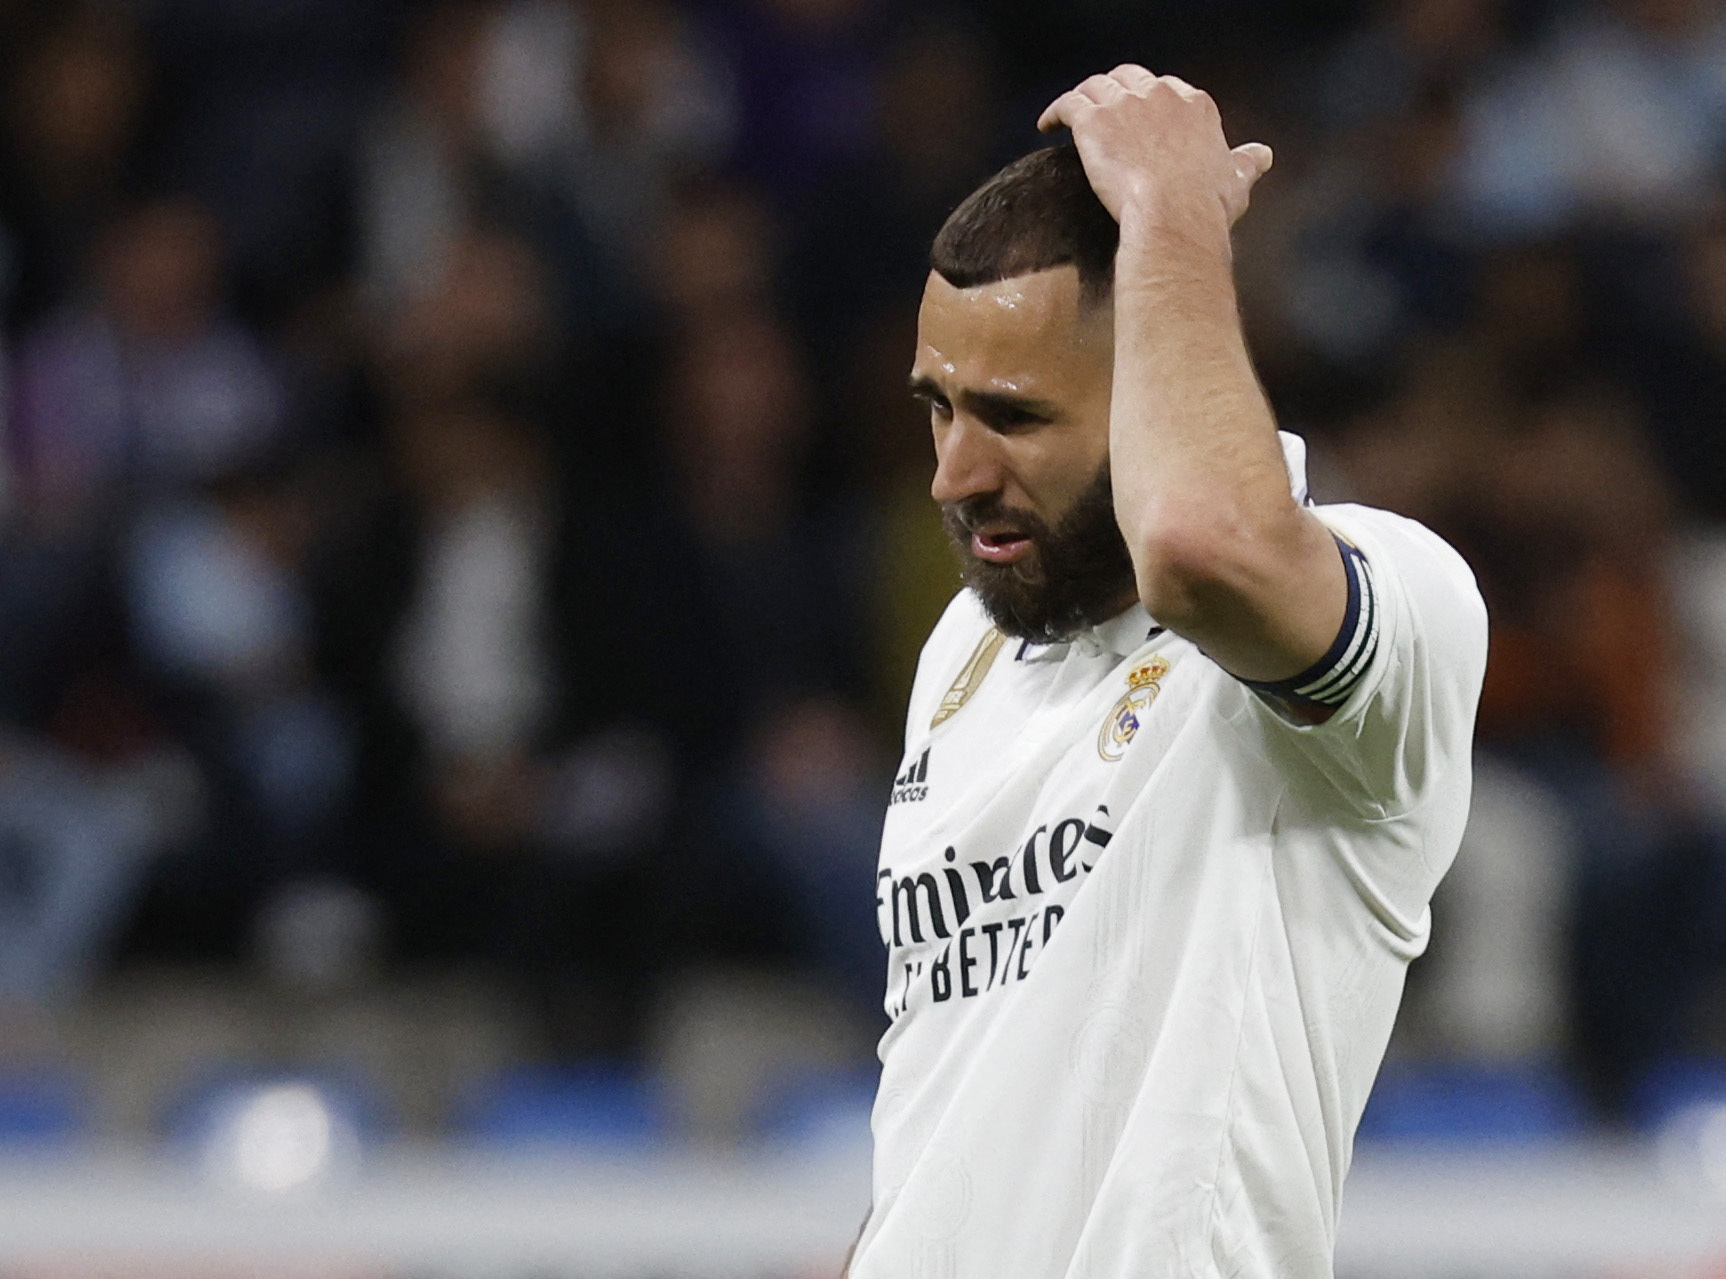 Benzema’s scoring record against Osasuna: no goals in nearly 10 years